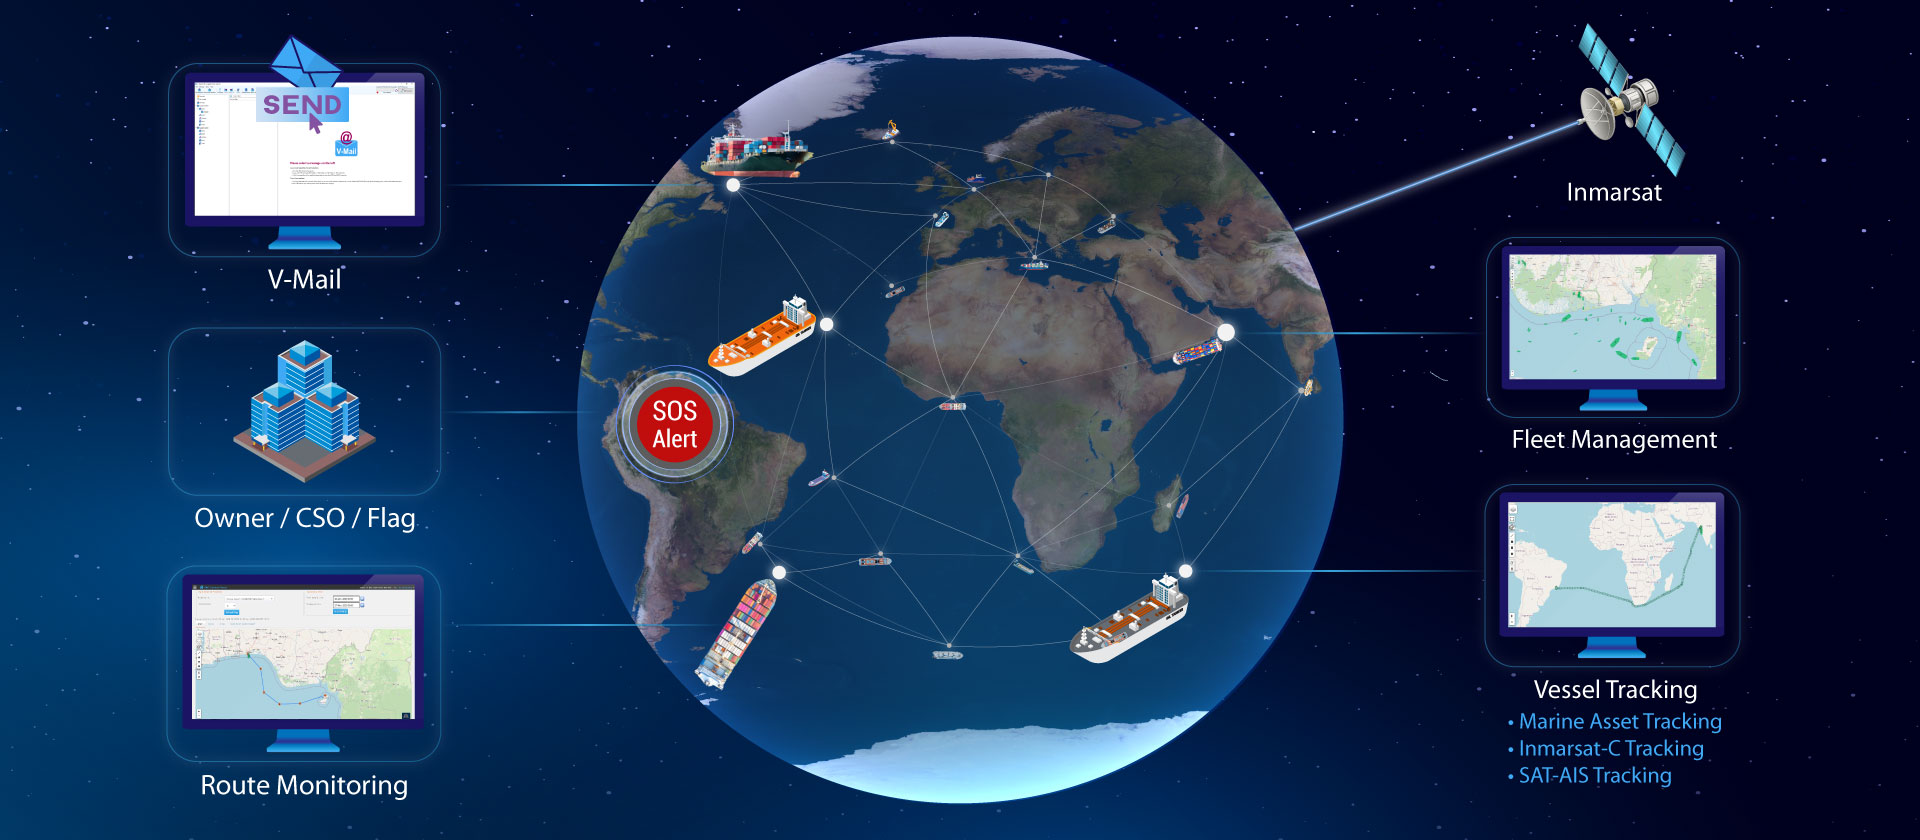 Vessel Tracking and Ship Security Alert System